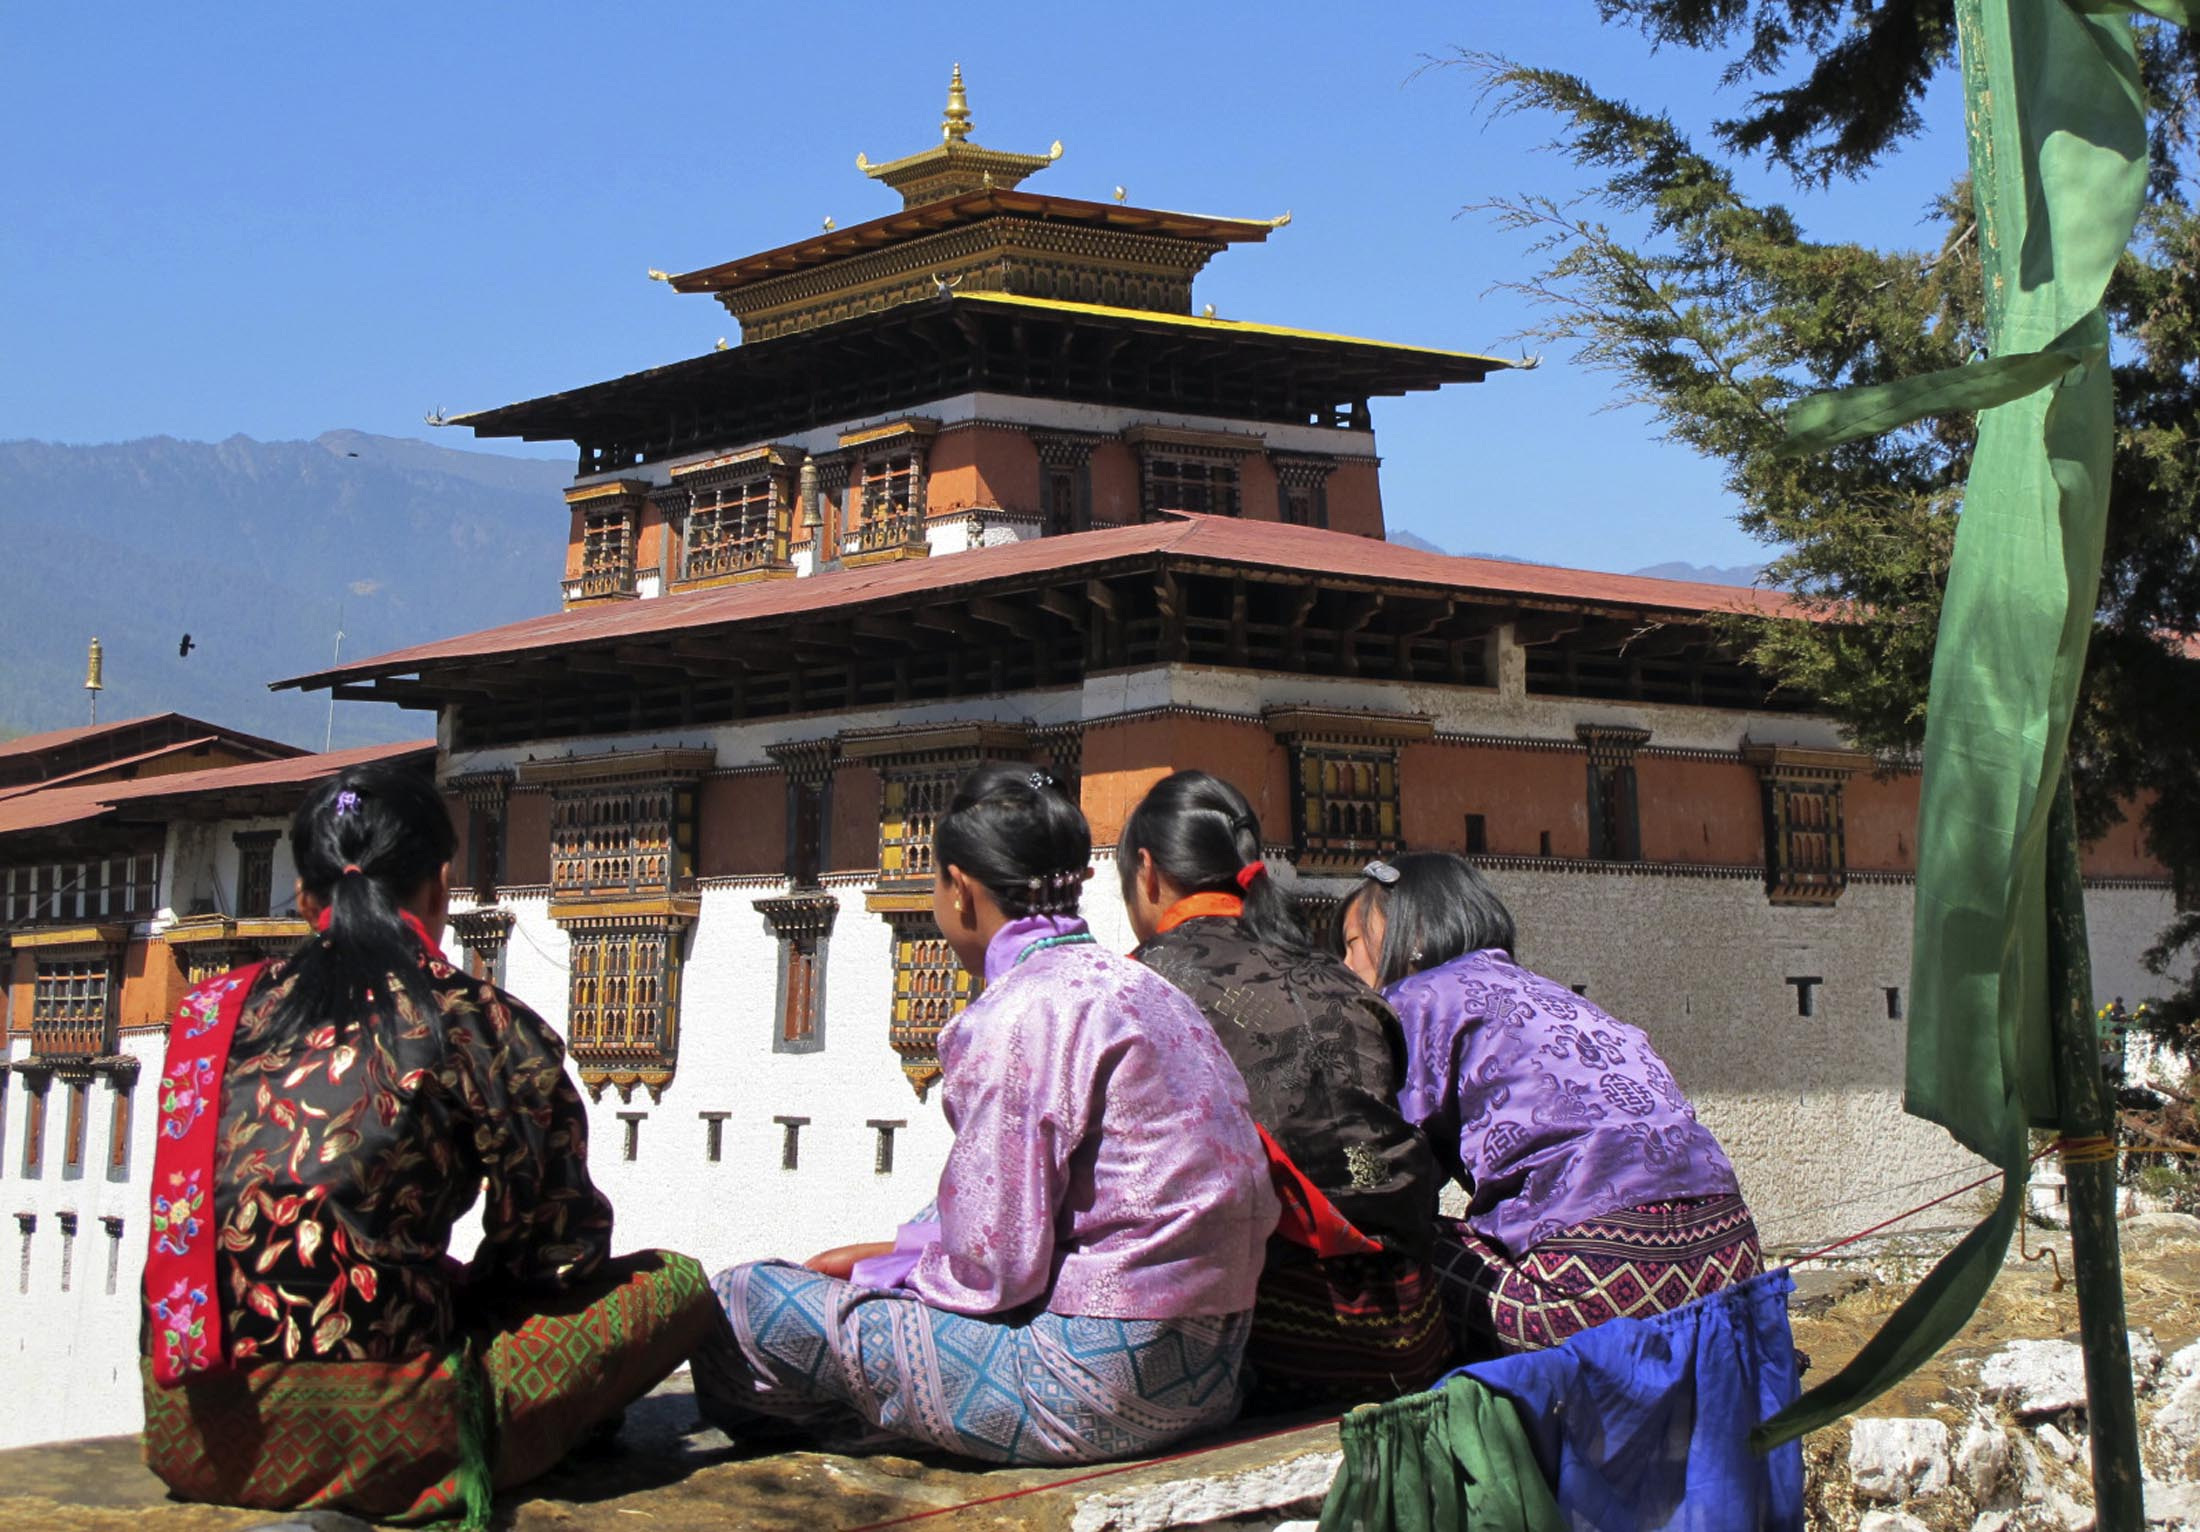 Bhutan to welcome tourists who can spend for first time since COVID Reuters